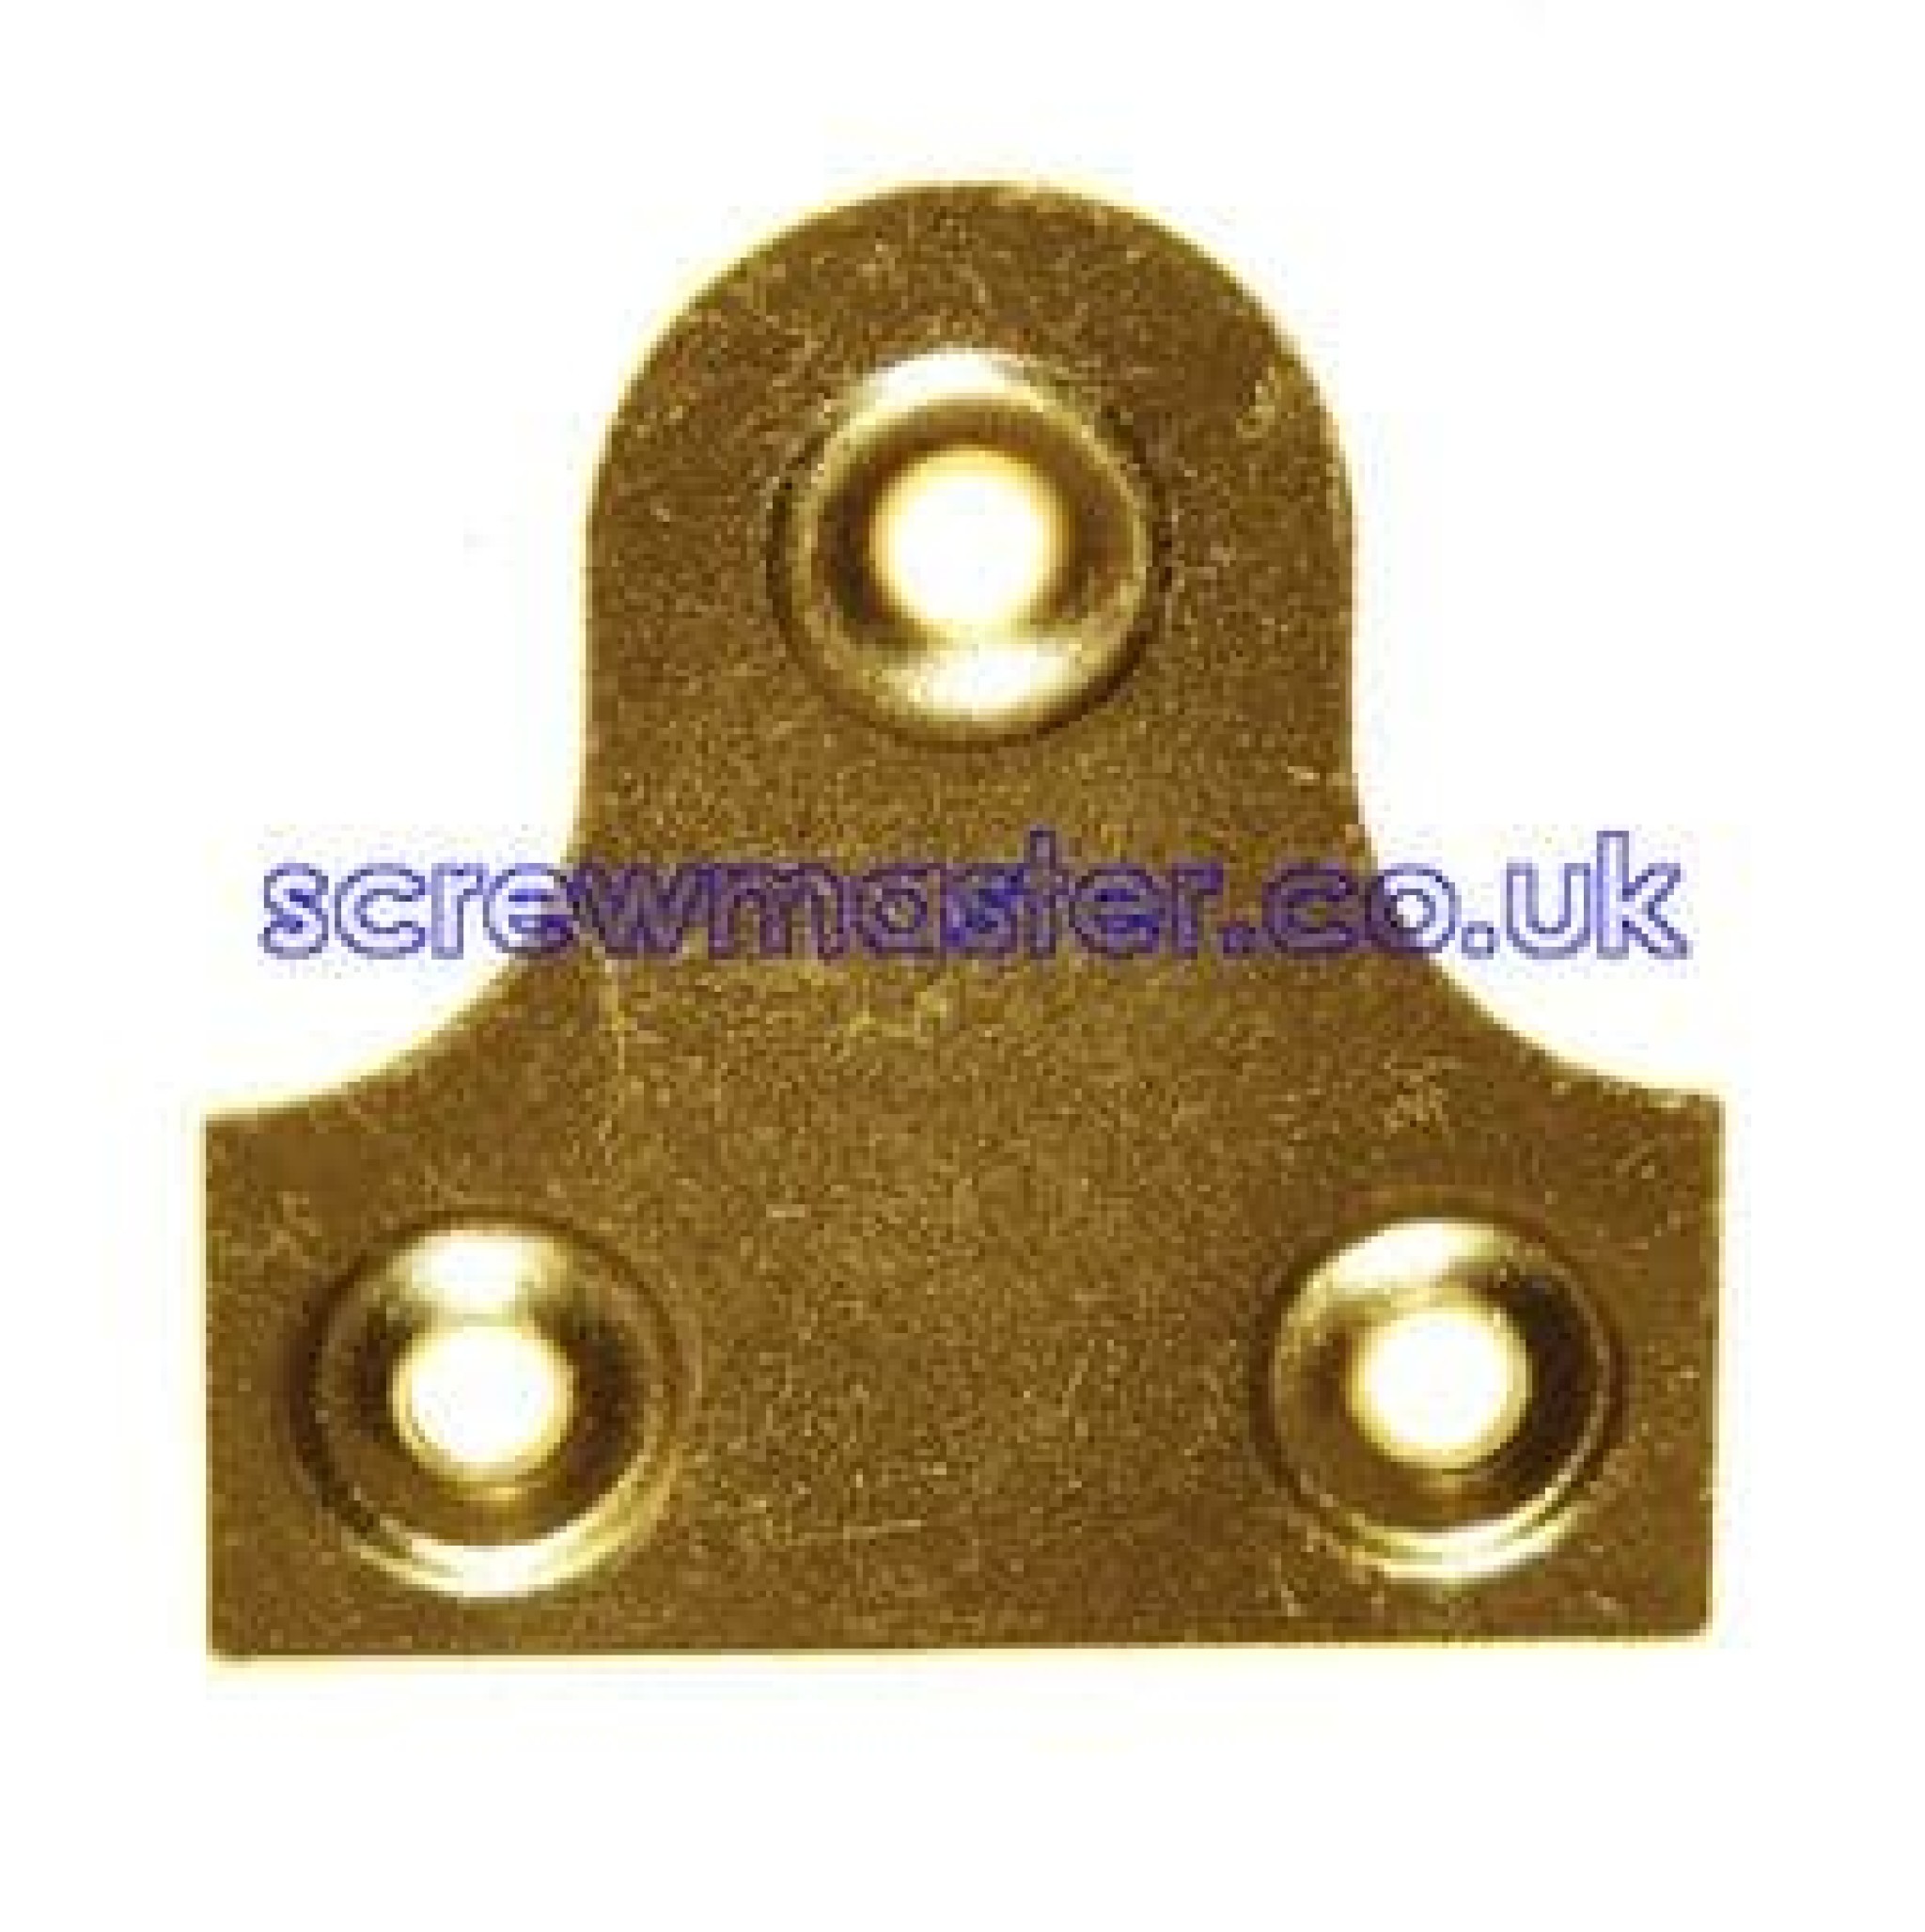 plain-mirror-plate-25mm-available-in-brass-or-chrome-plated-106-p.jpg